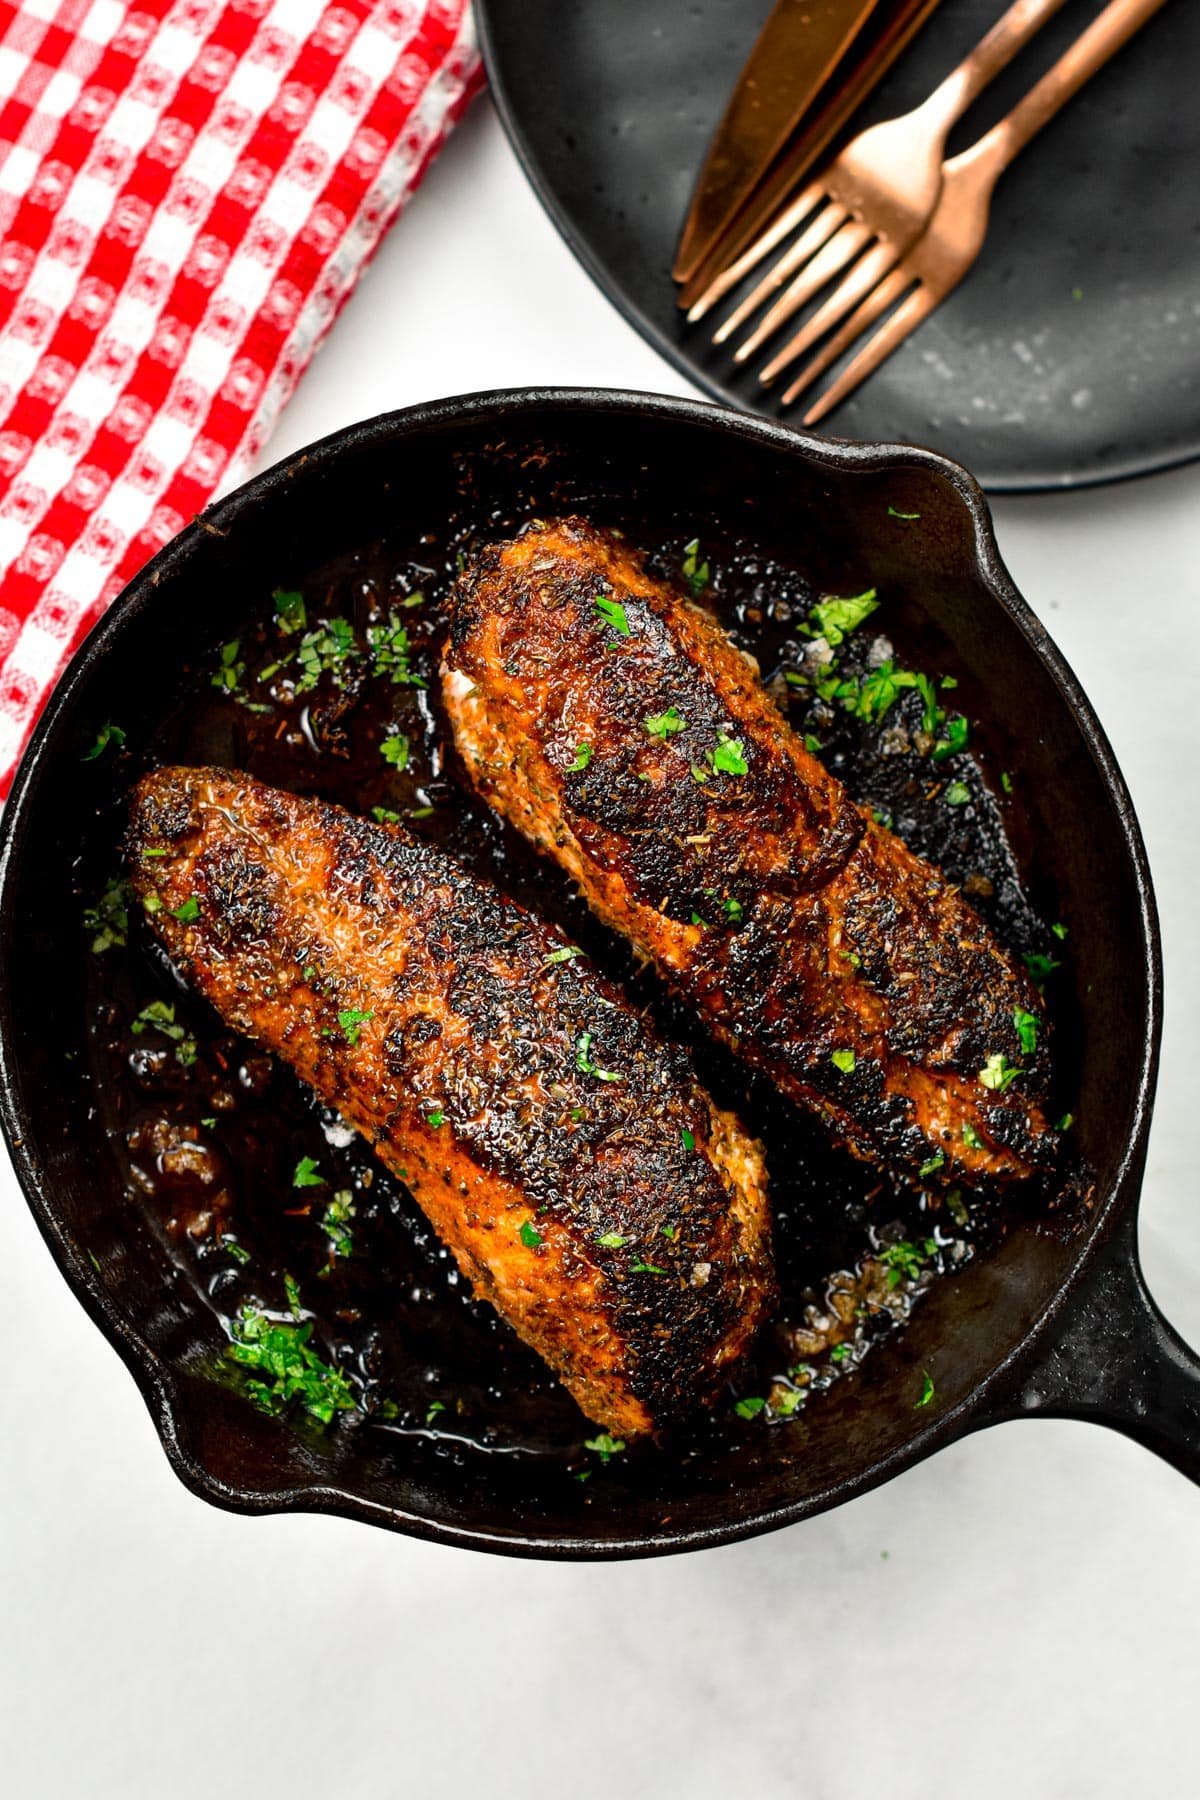 Blackened Chicken cooked in a large cast-iron pan.